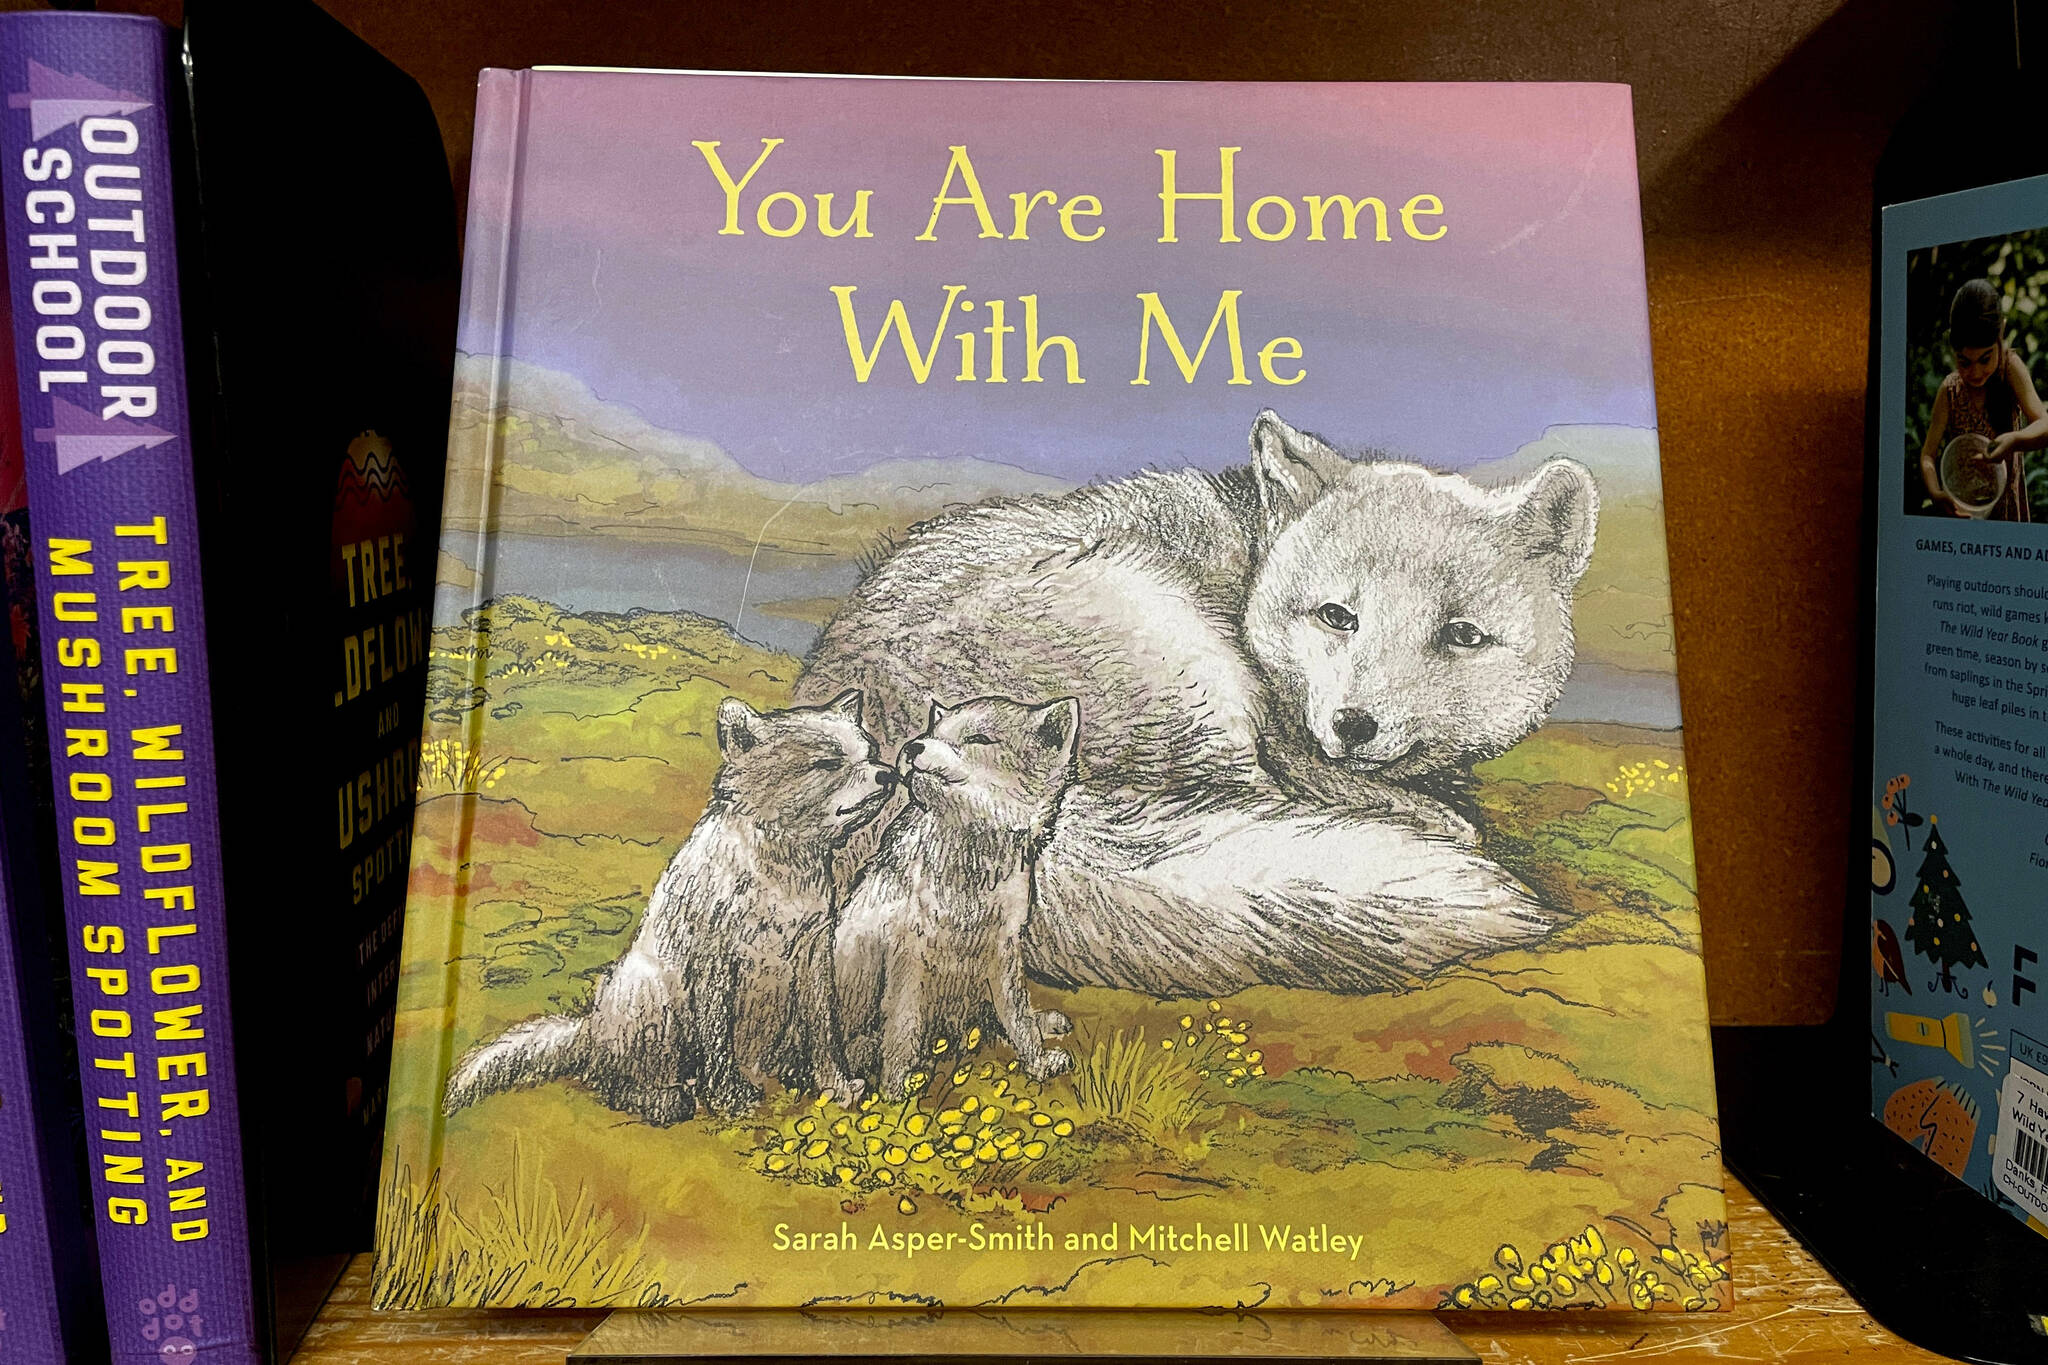 The children’s book “You Are Home With Me,” illustrated by Mitchell Thomas Watley, is shown at a bookstore in Portland, Ore. in this April 5, 2023 photo. Publisher Sasquatch books, owned by Penguin Random House, said Wednesday, April 5, 2023, it has ended its publishing relationship with Watley after he was arrested on allegations of leaving violent, transphobic notes in stores around Juneau, Alaska. Watley told police he was motivated by fear following a deadly school shooting in Nashville that sparked online backlash about the shooter’s gender identity, court records show. (AP Photo/Claire Rush)